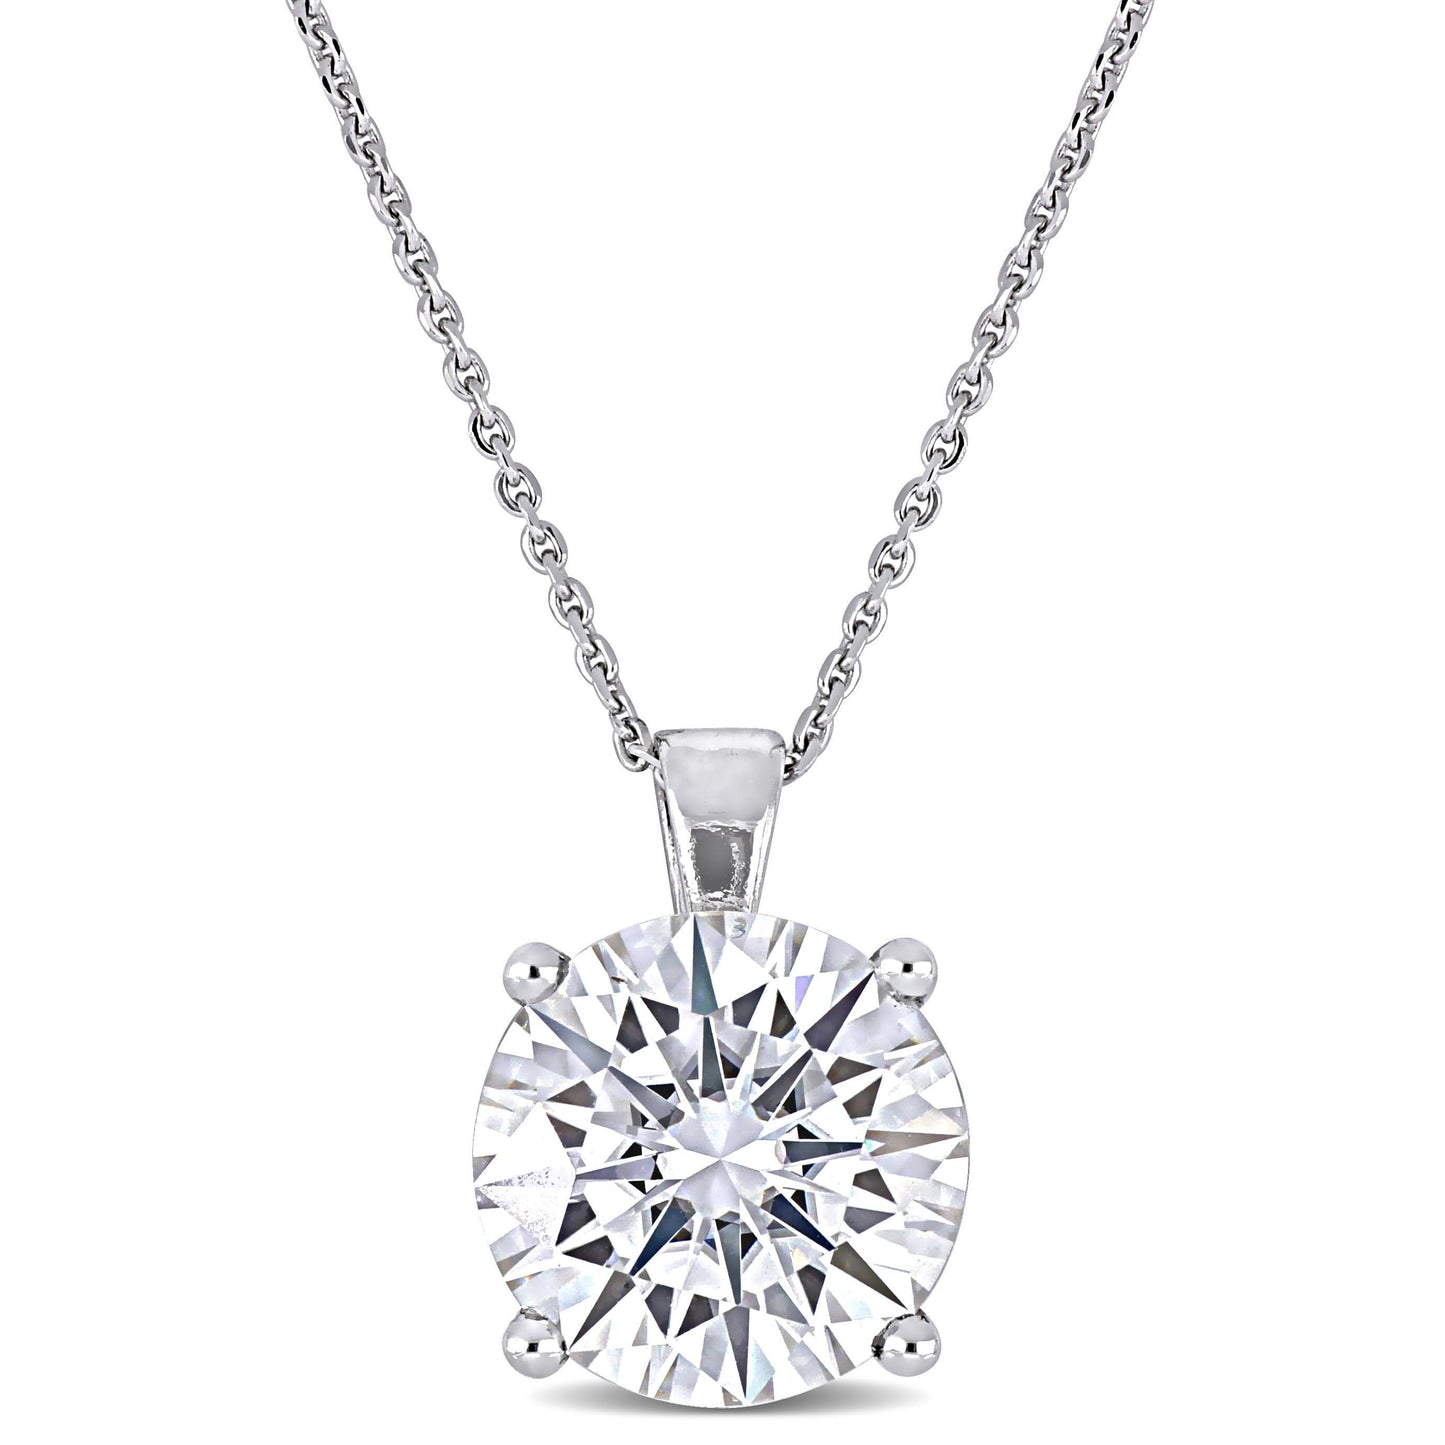 3 3/4ct Moissanite Solitaire Necklace in 14k White Gold